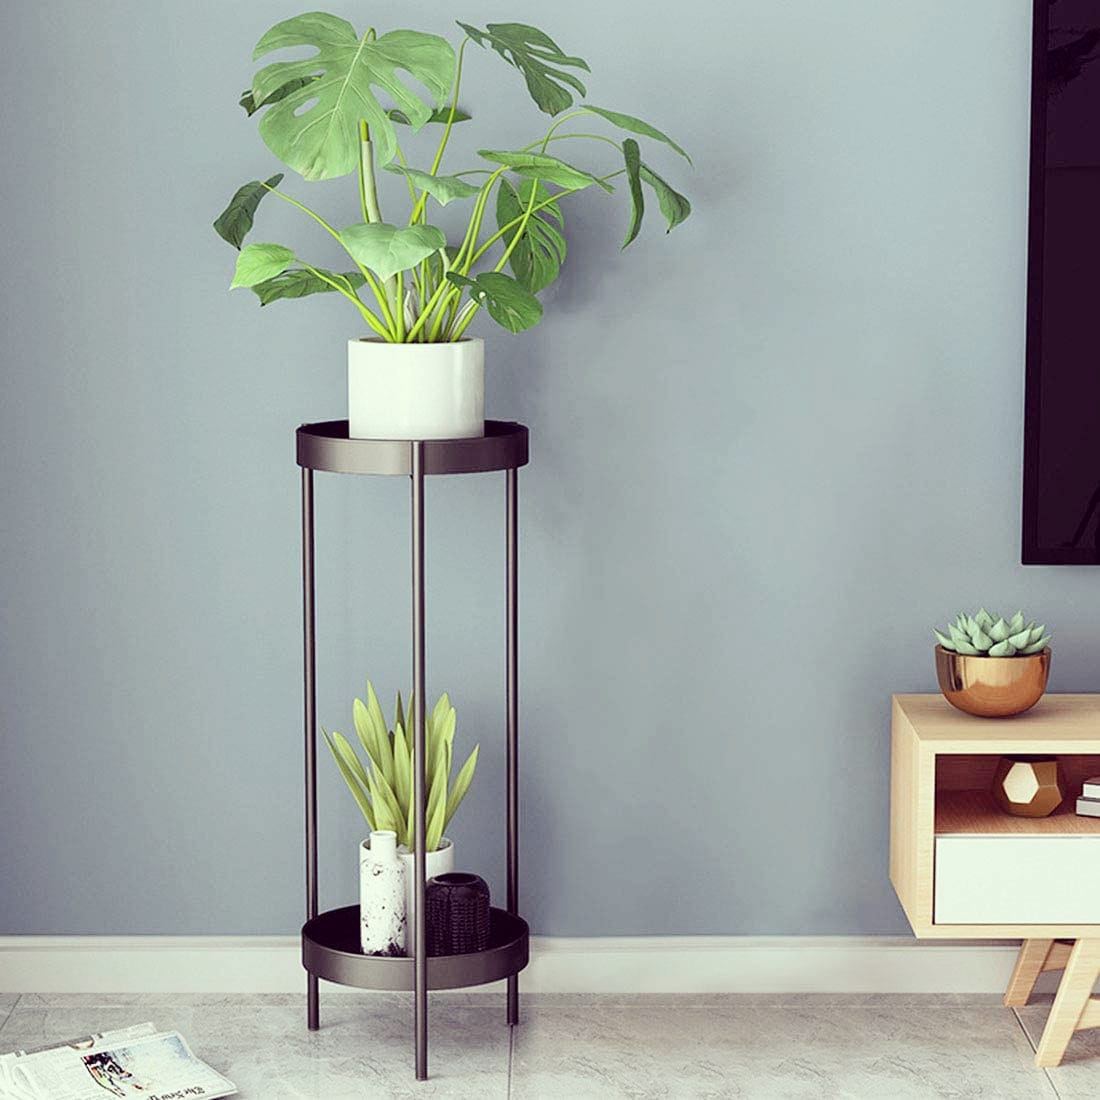 Metal Black Tall and Medium Plant Stand - Set of 2